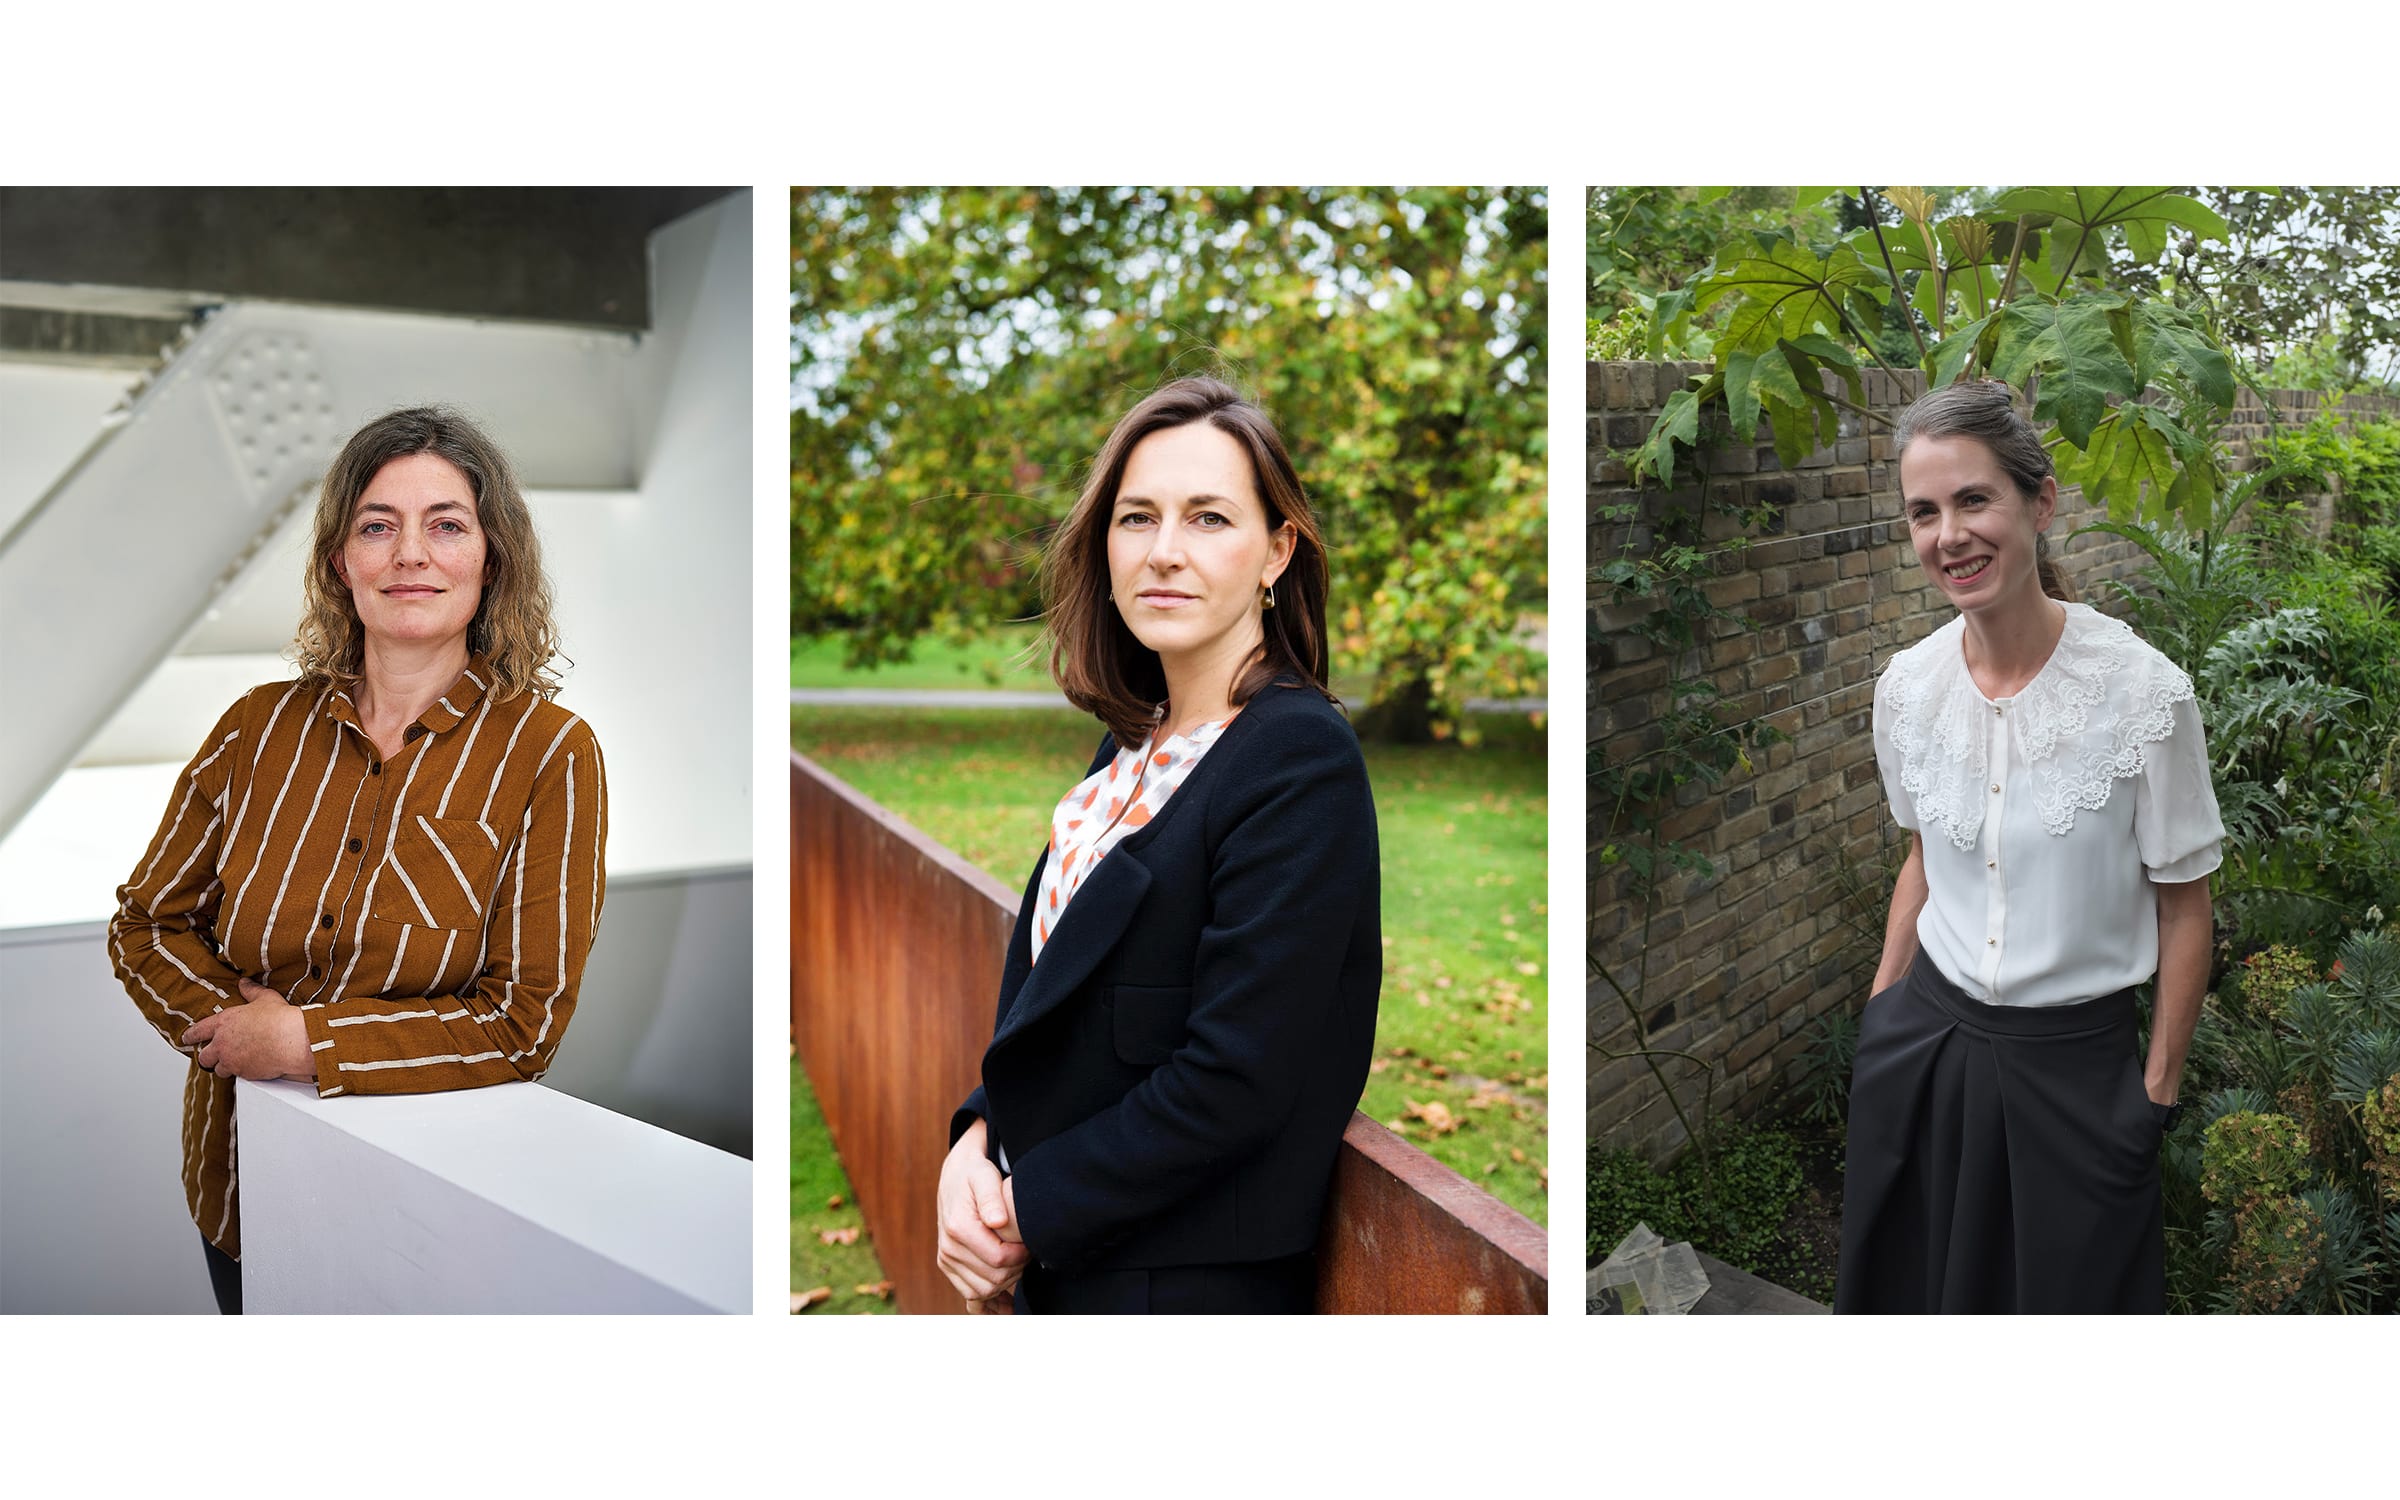 From left to right: Lisa Panting, co-director of Hollybush Gardens; Jo Stella-Sawicka, director of Goodman Gallery; and  Emma Robertson, partner and director at The approach. Their galleries will be participating in the inaugural edition of London Gallery Weekend. Photo of Lisa Panting © Anne Tetzlaff.